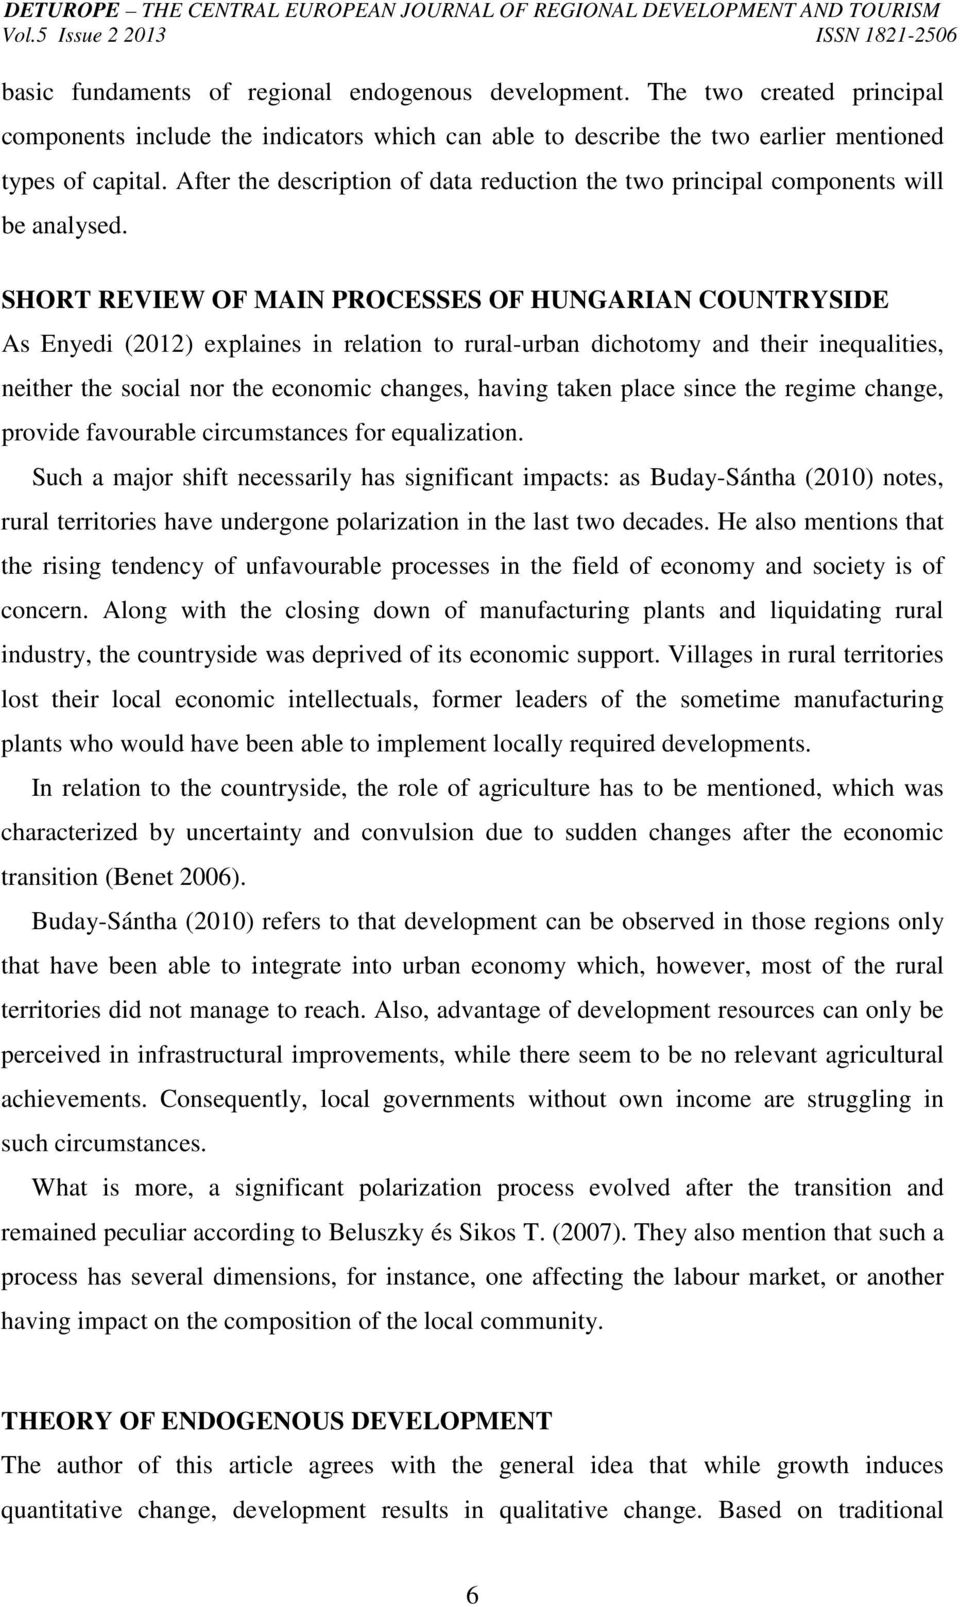 SHORT REVIEW OF MAIN PROCESSES OF HUNGARIAN COUNTRYSIDE As Enyedi (2012) explaines in relation to rural-urban dichotomy and their inequalities, neither the social nor the economic changes, having